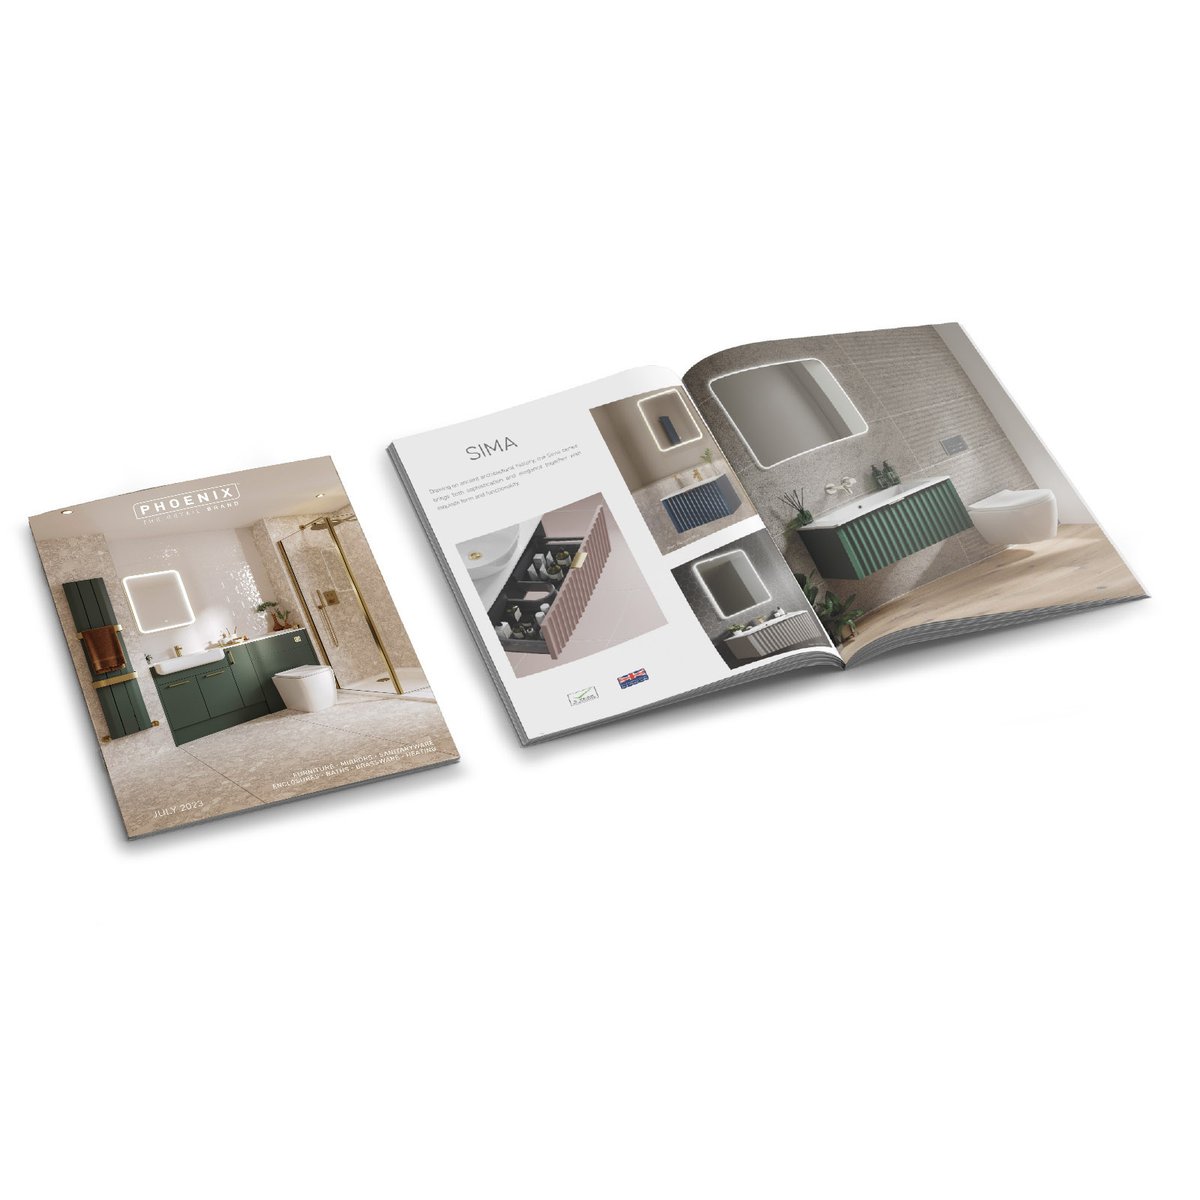 Phoenix July Brochure now available featuring new fitted furniture, new brassware, new bath, new basin, new enclosure, new radiators and more. phoenix-uk.co.uk/brochures